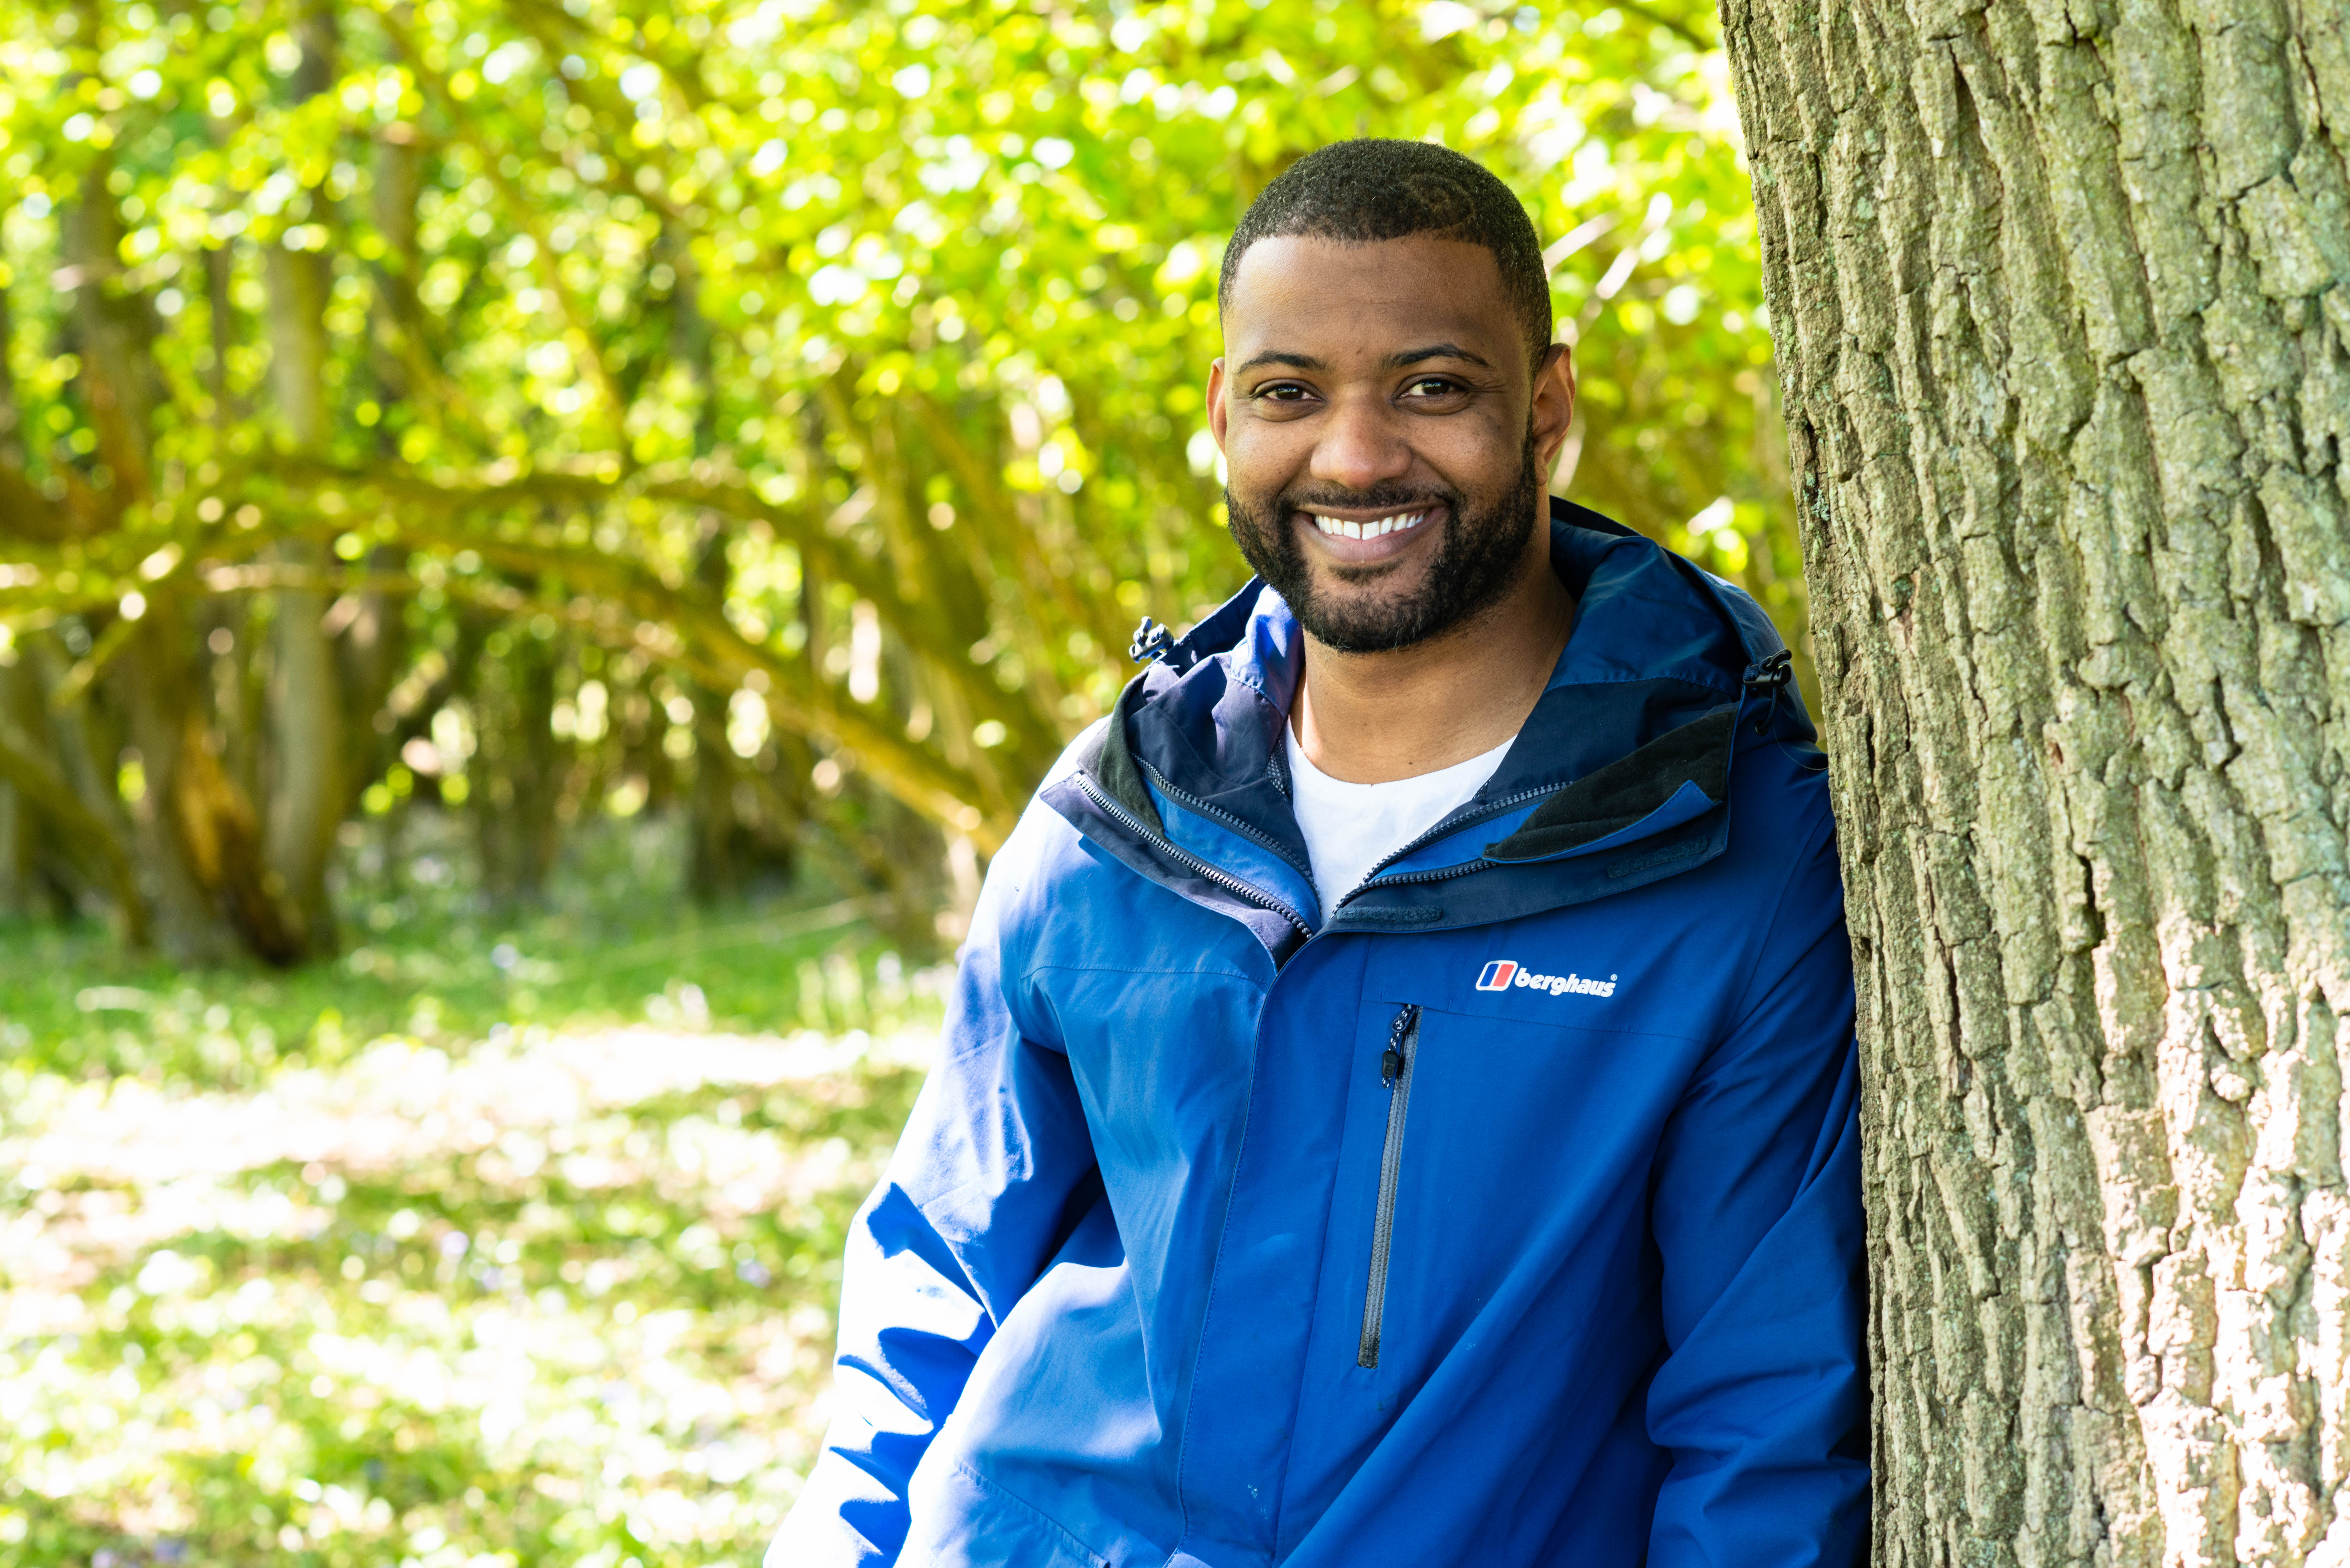 Former JLS popstar turned presenter JB Gill is backing the campaign (WTLM/PA)